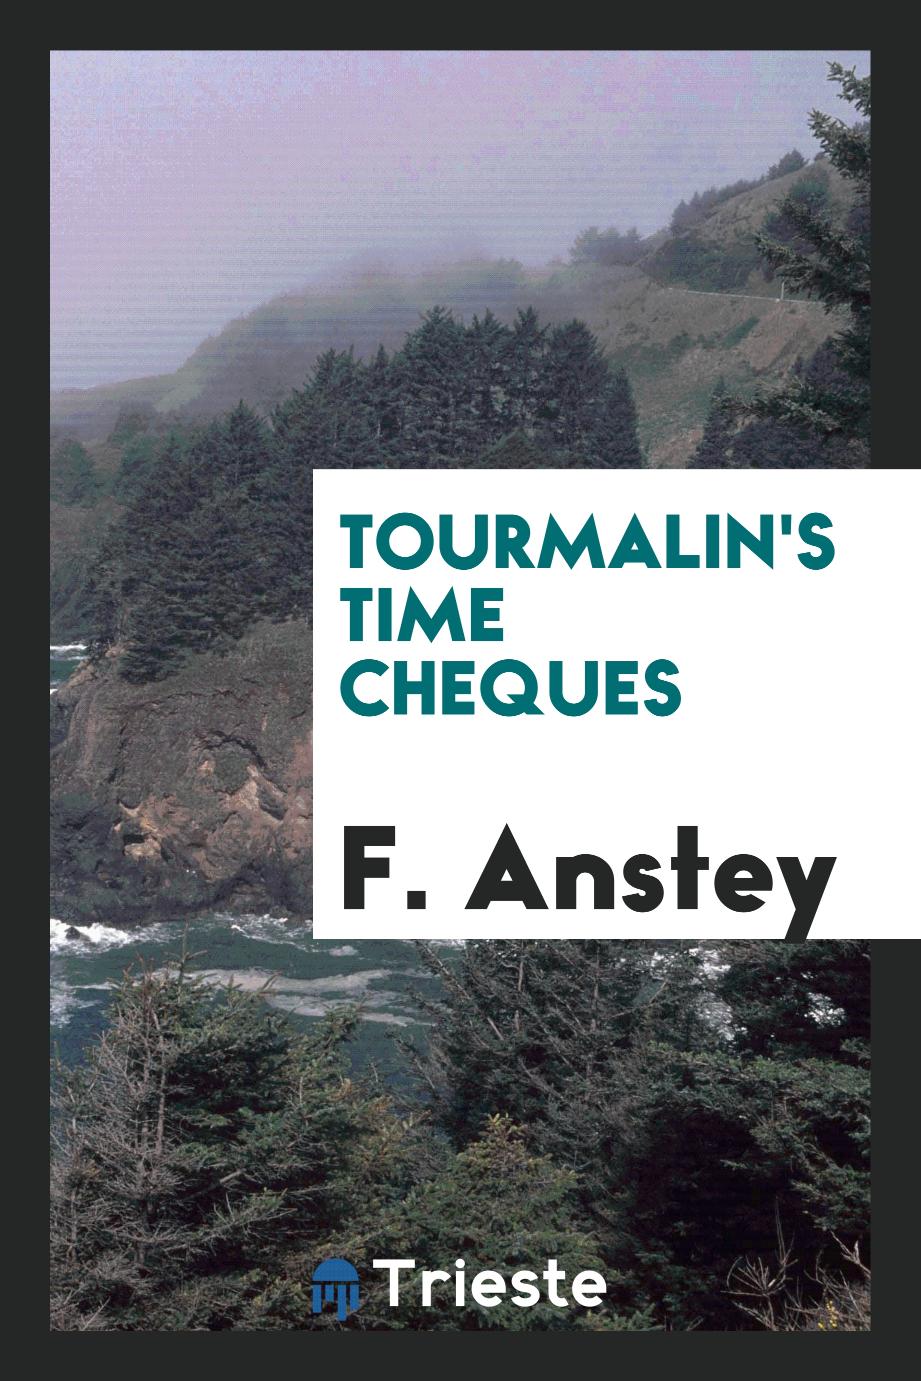 Tourmalin's time cheques